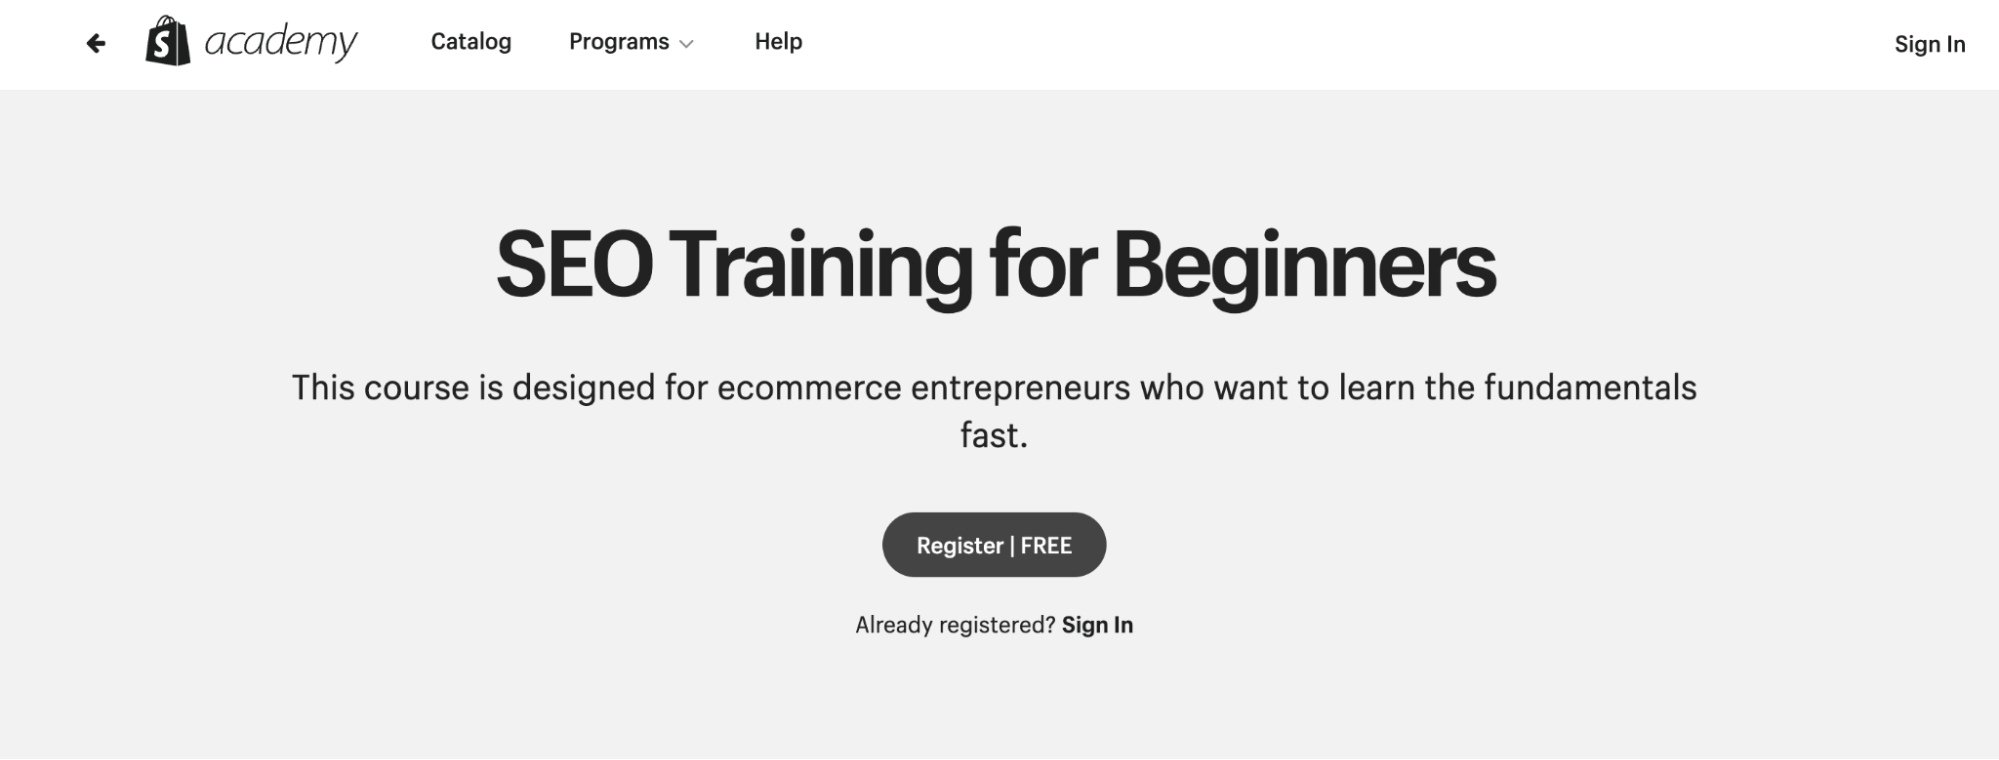 Landing page for SEO training for Beginners course by Shopify